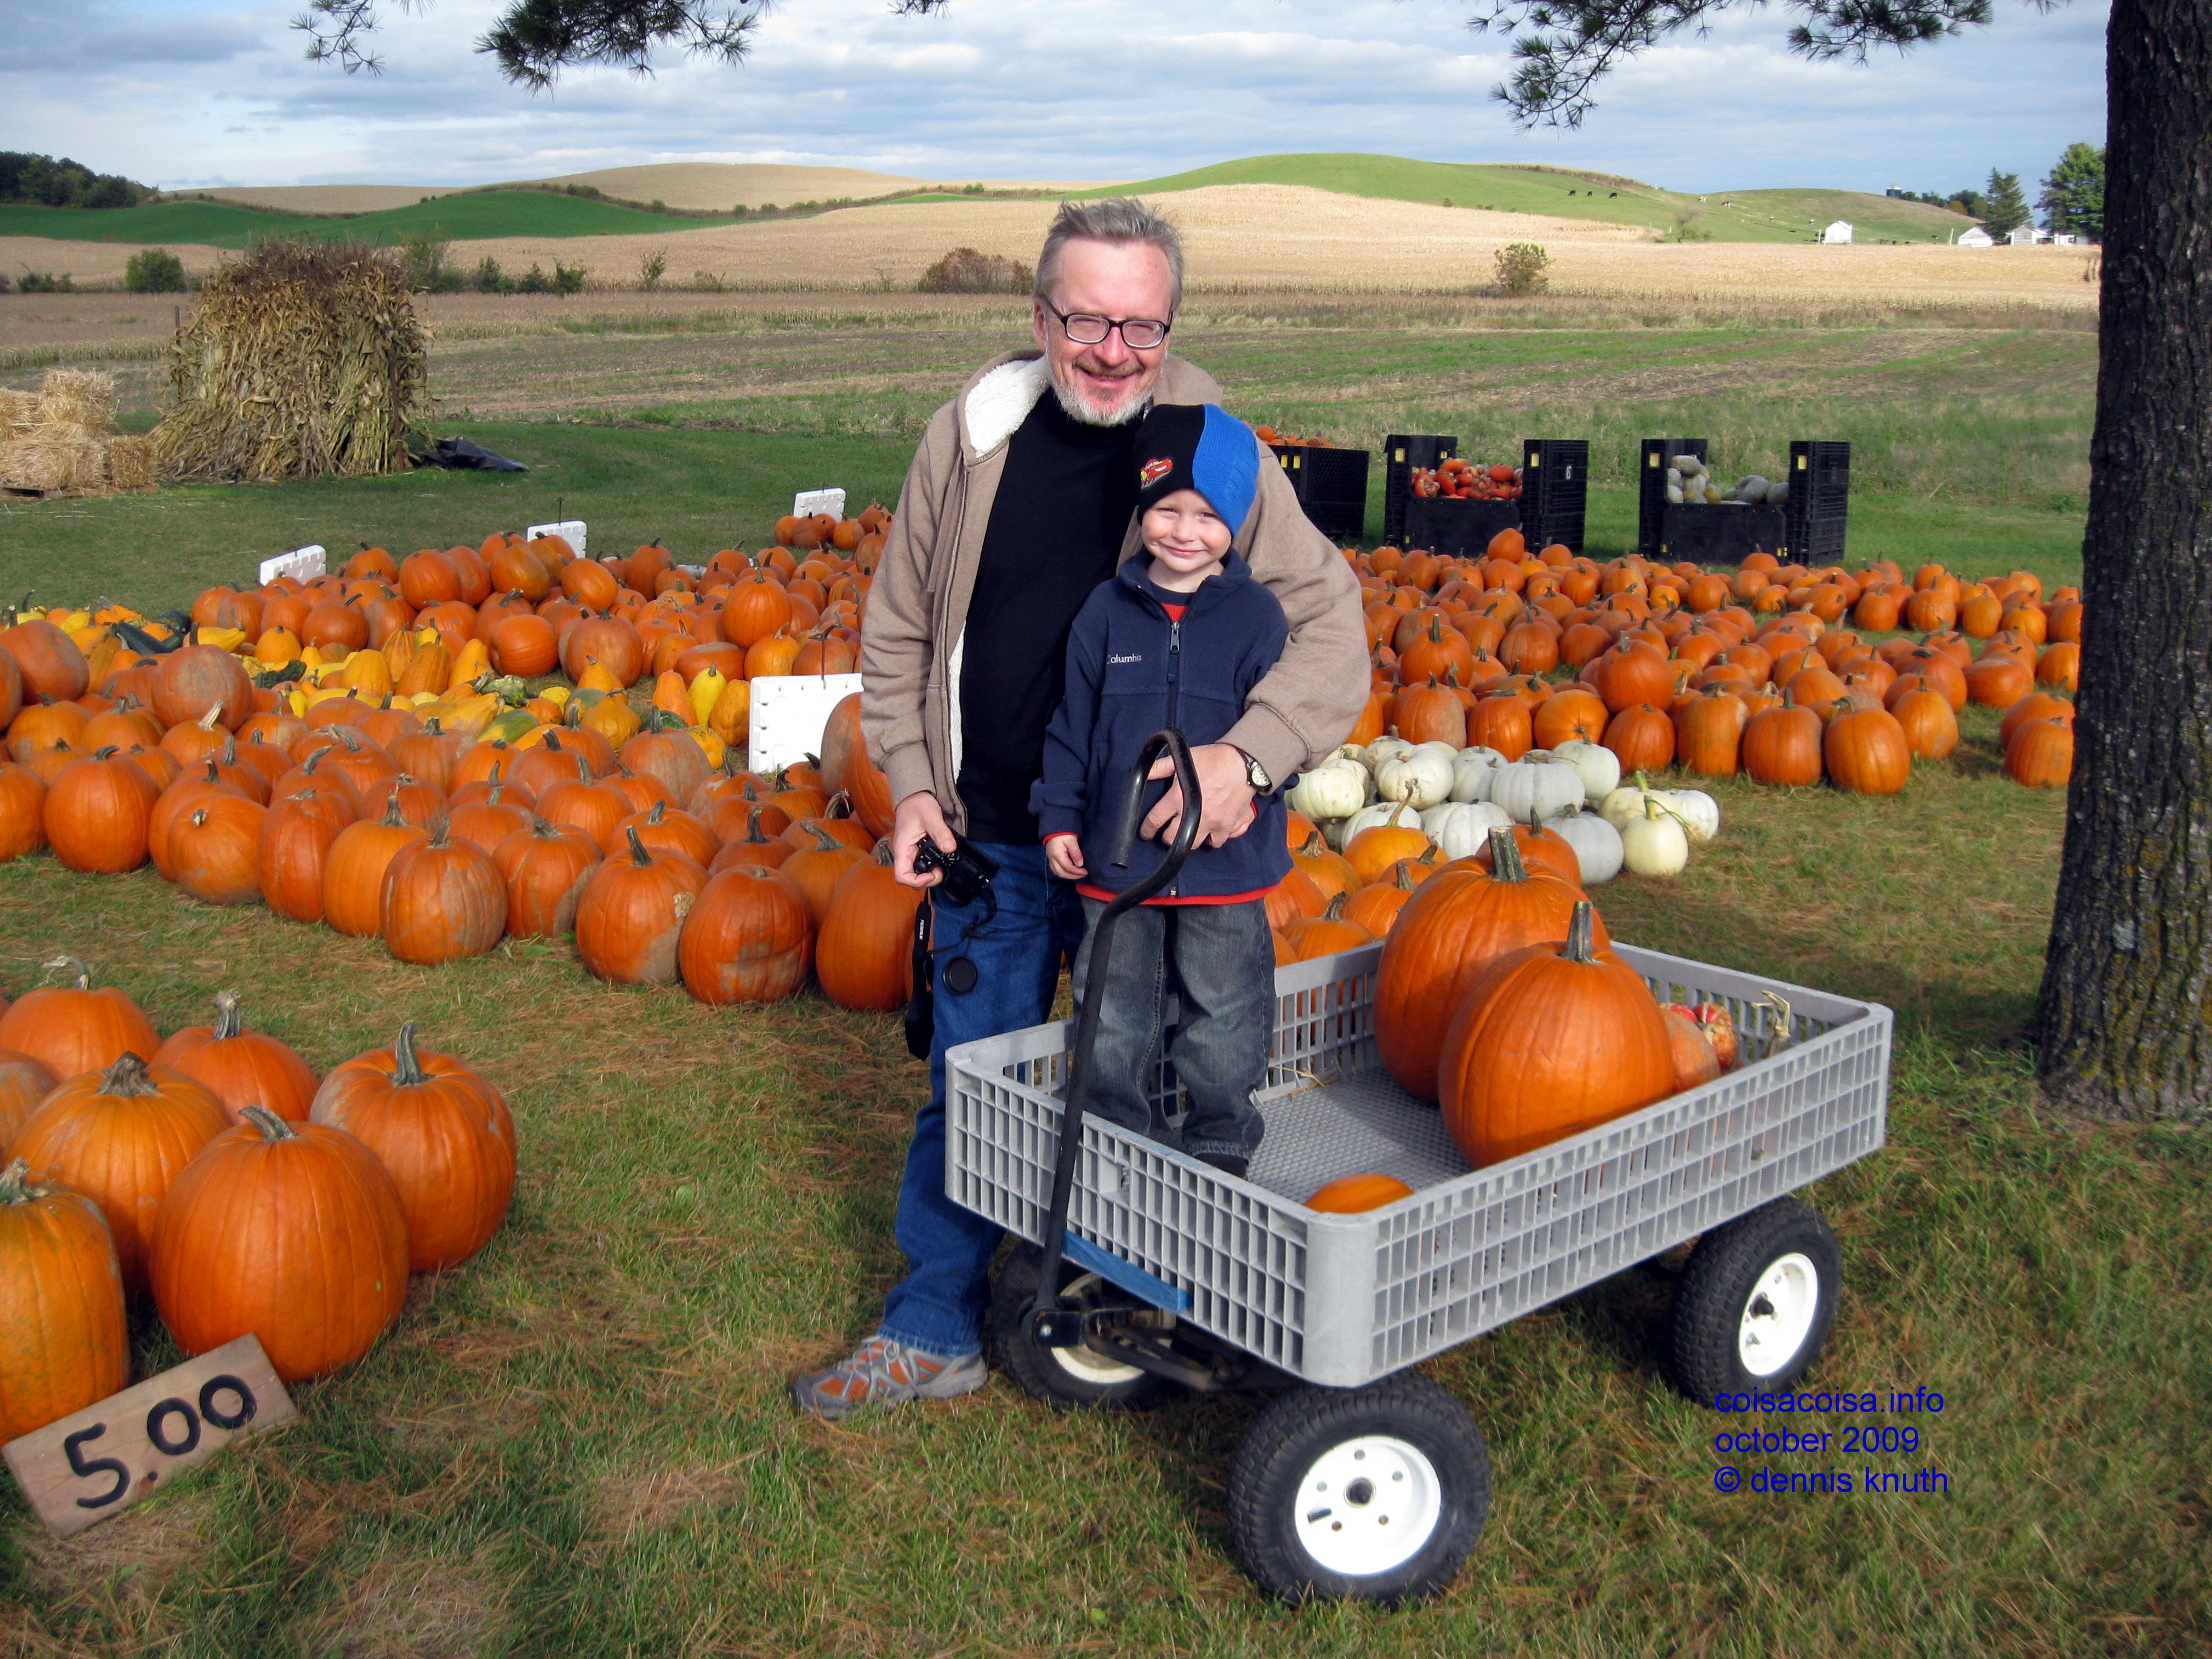 Dennis and Jared in the Pumpkin Patch